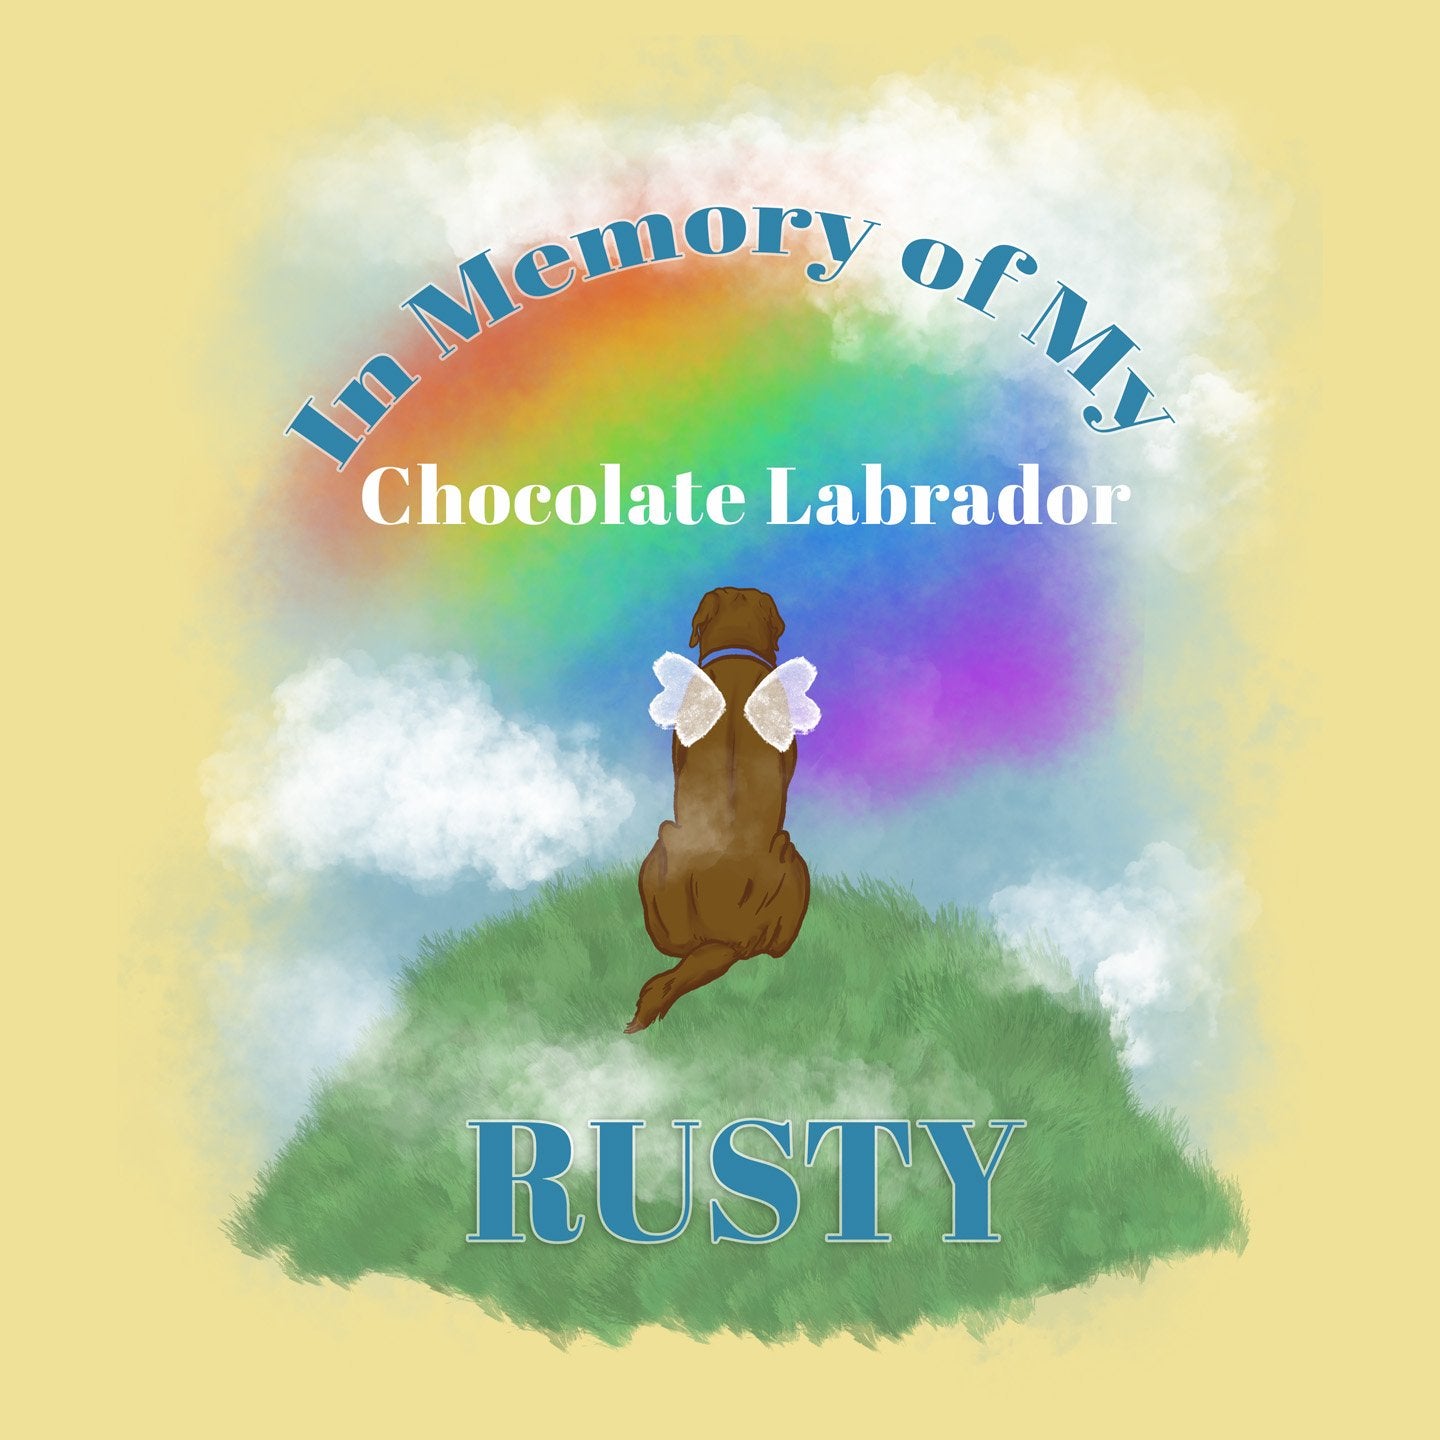 In Memory of My Chocolate Lab - Personalized Custom Adult Unisex T-Shirt